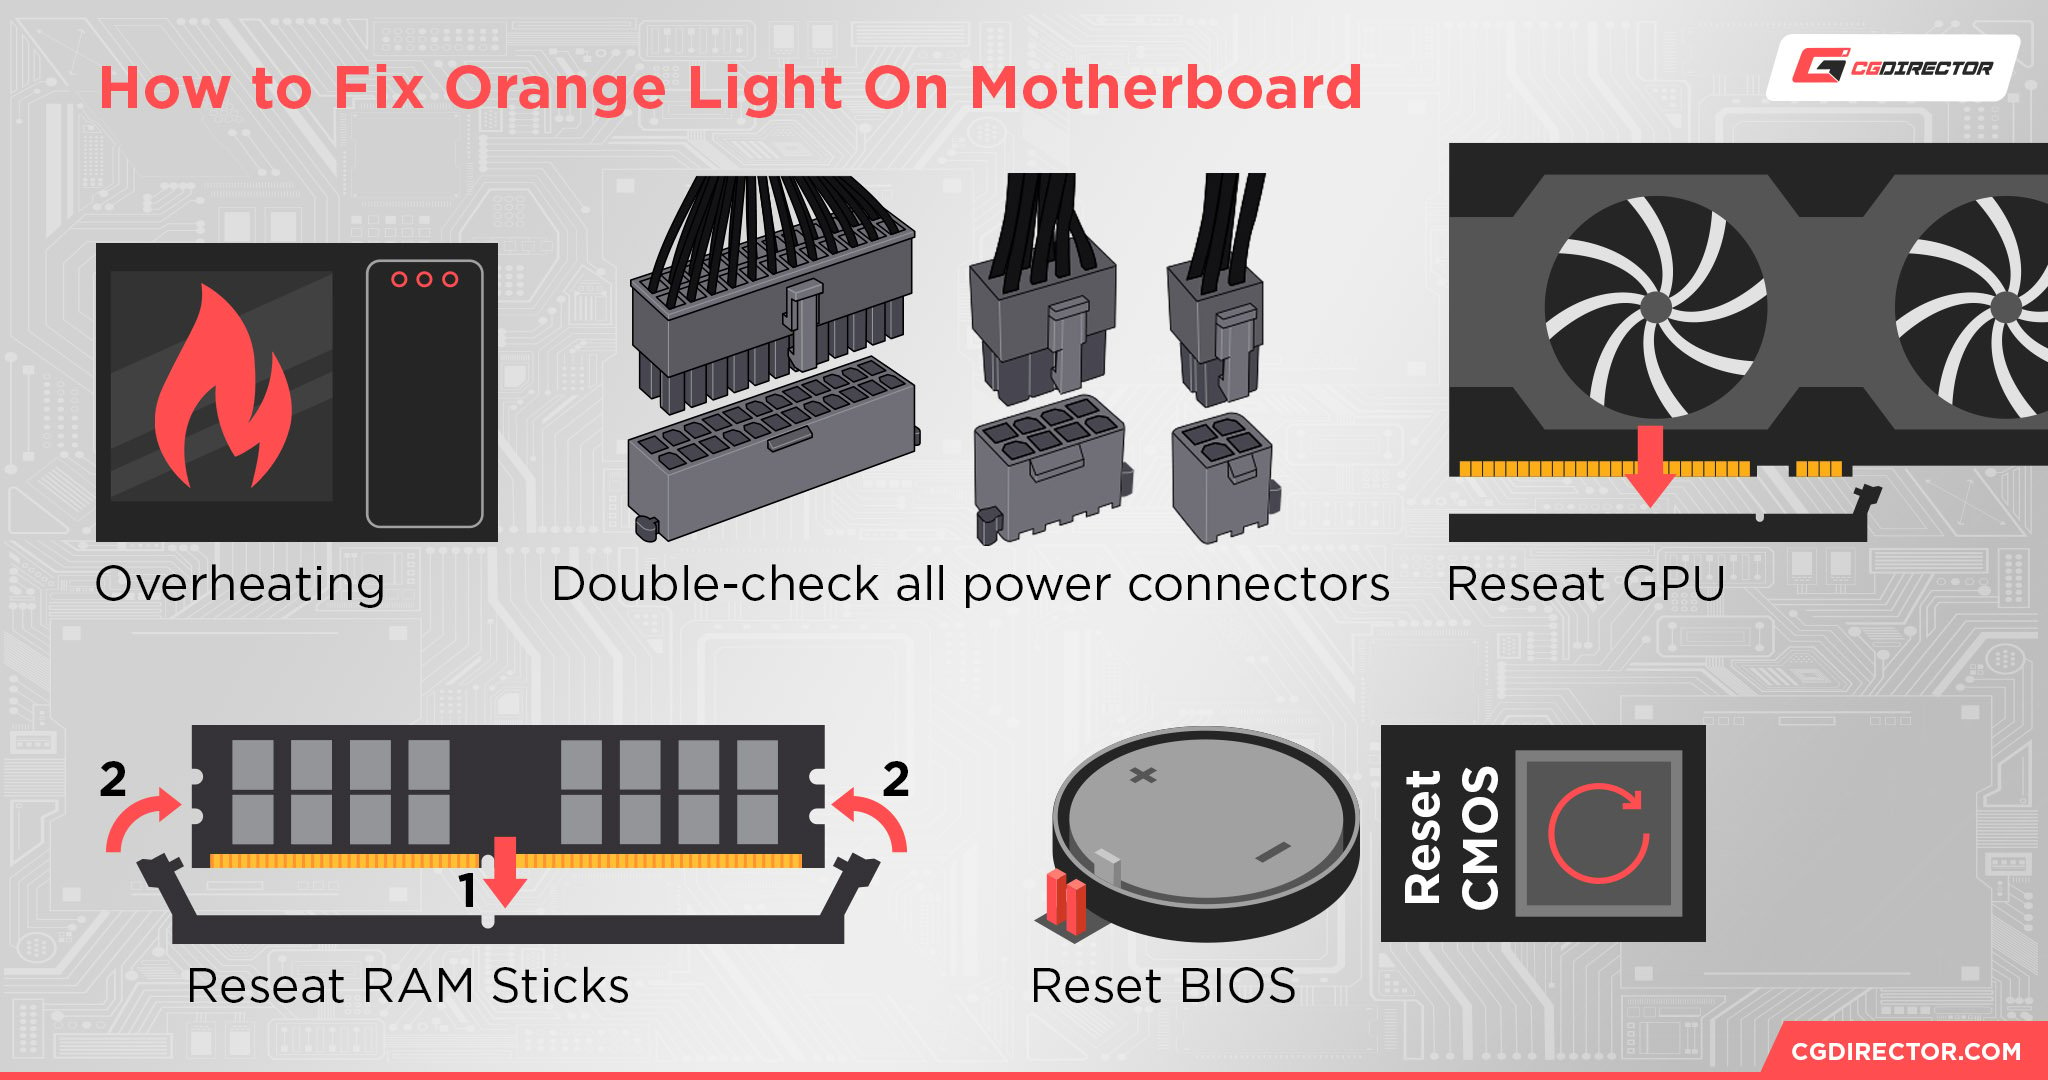 What Does Orange Light On Motherboard Mean